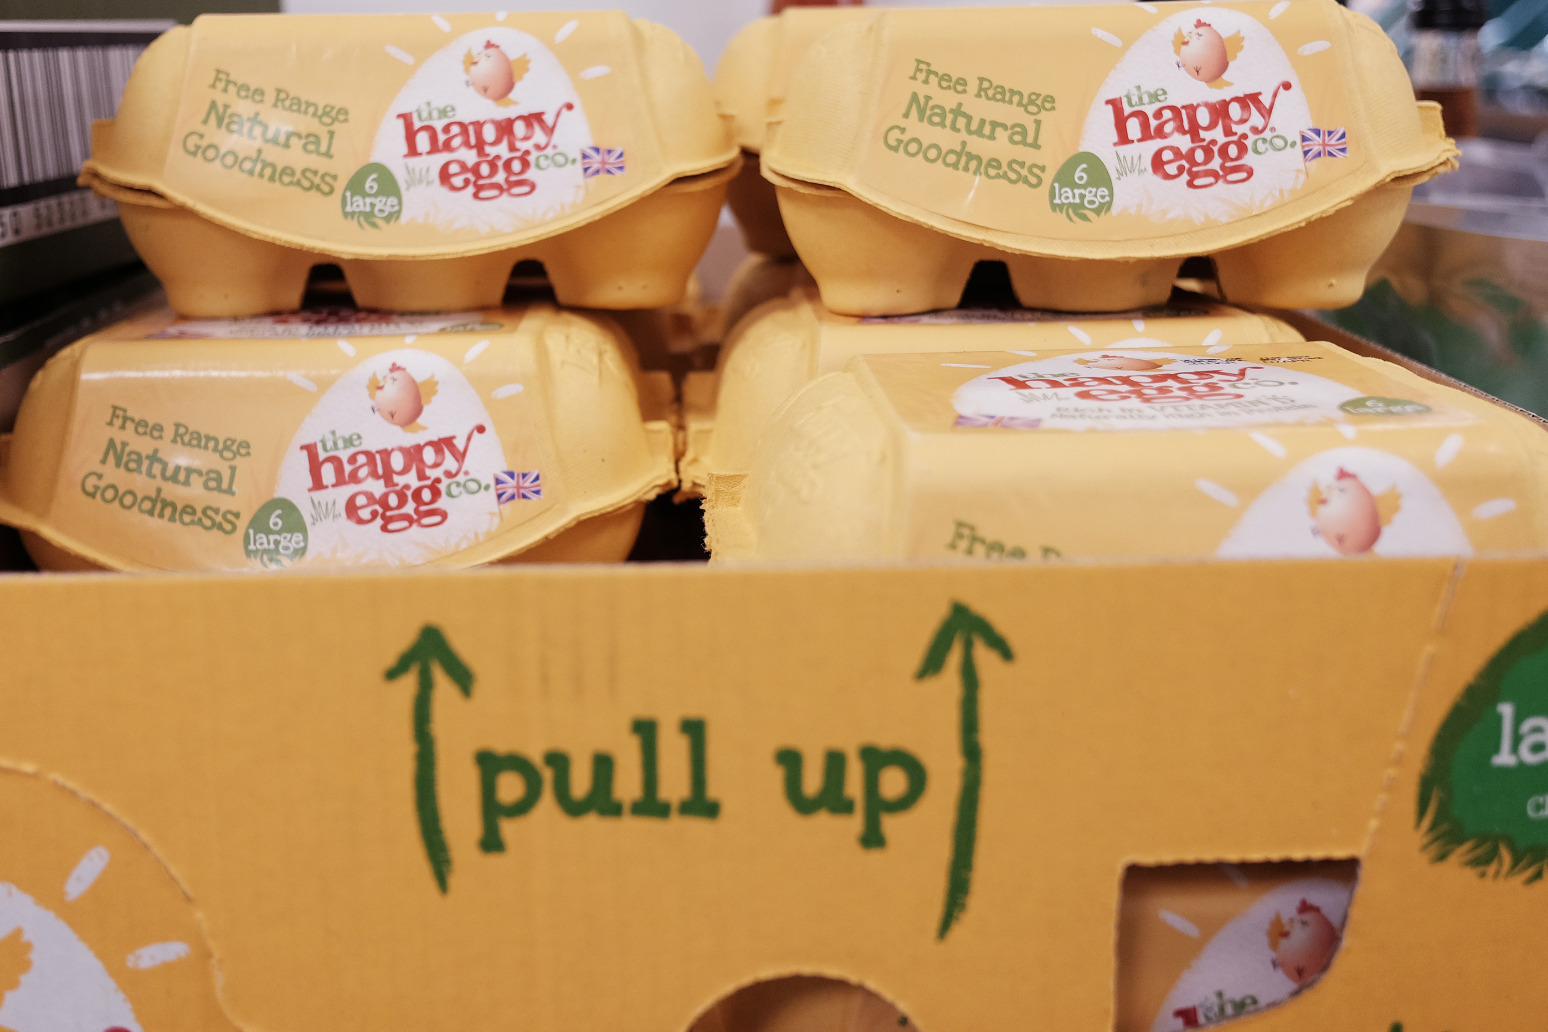 Free range eggs no longer available in UK due to bird flu 